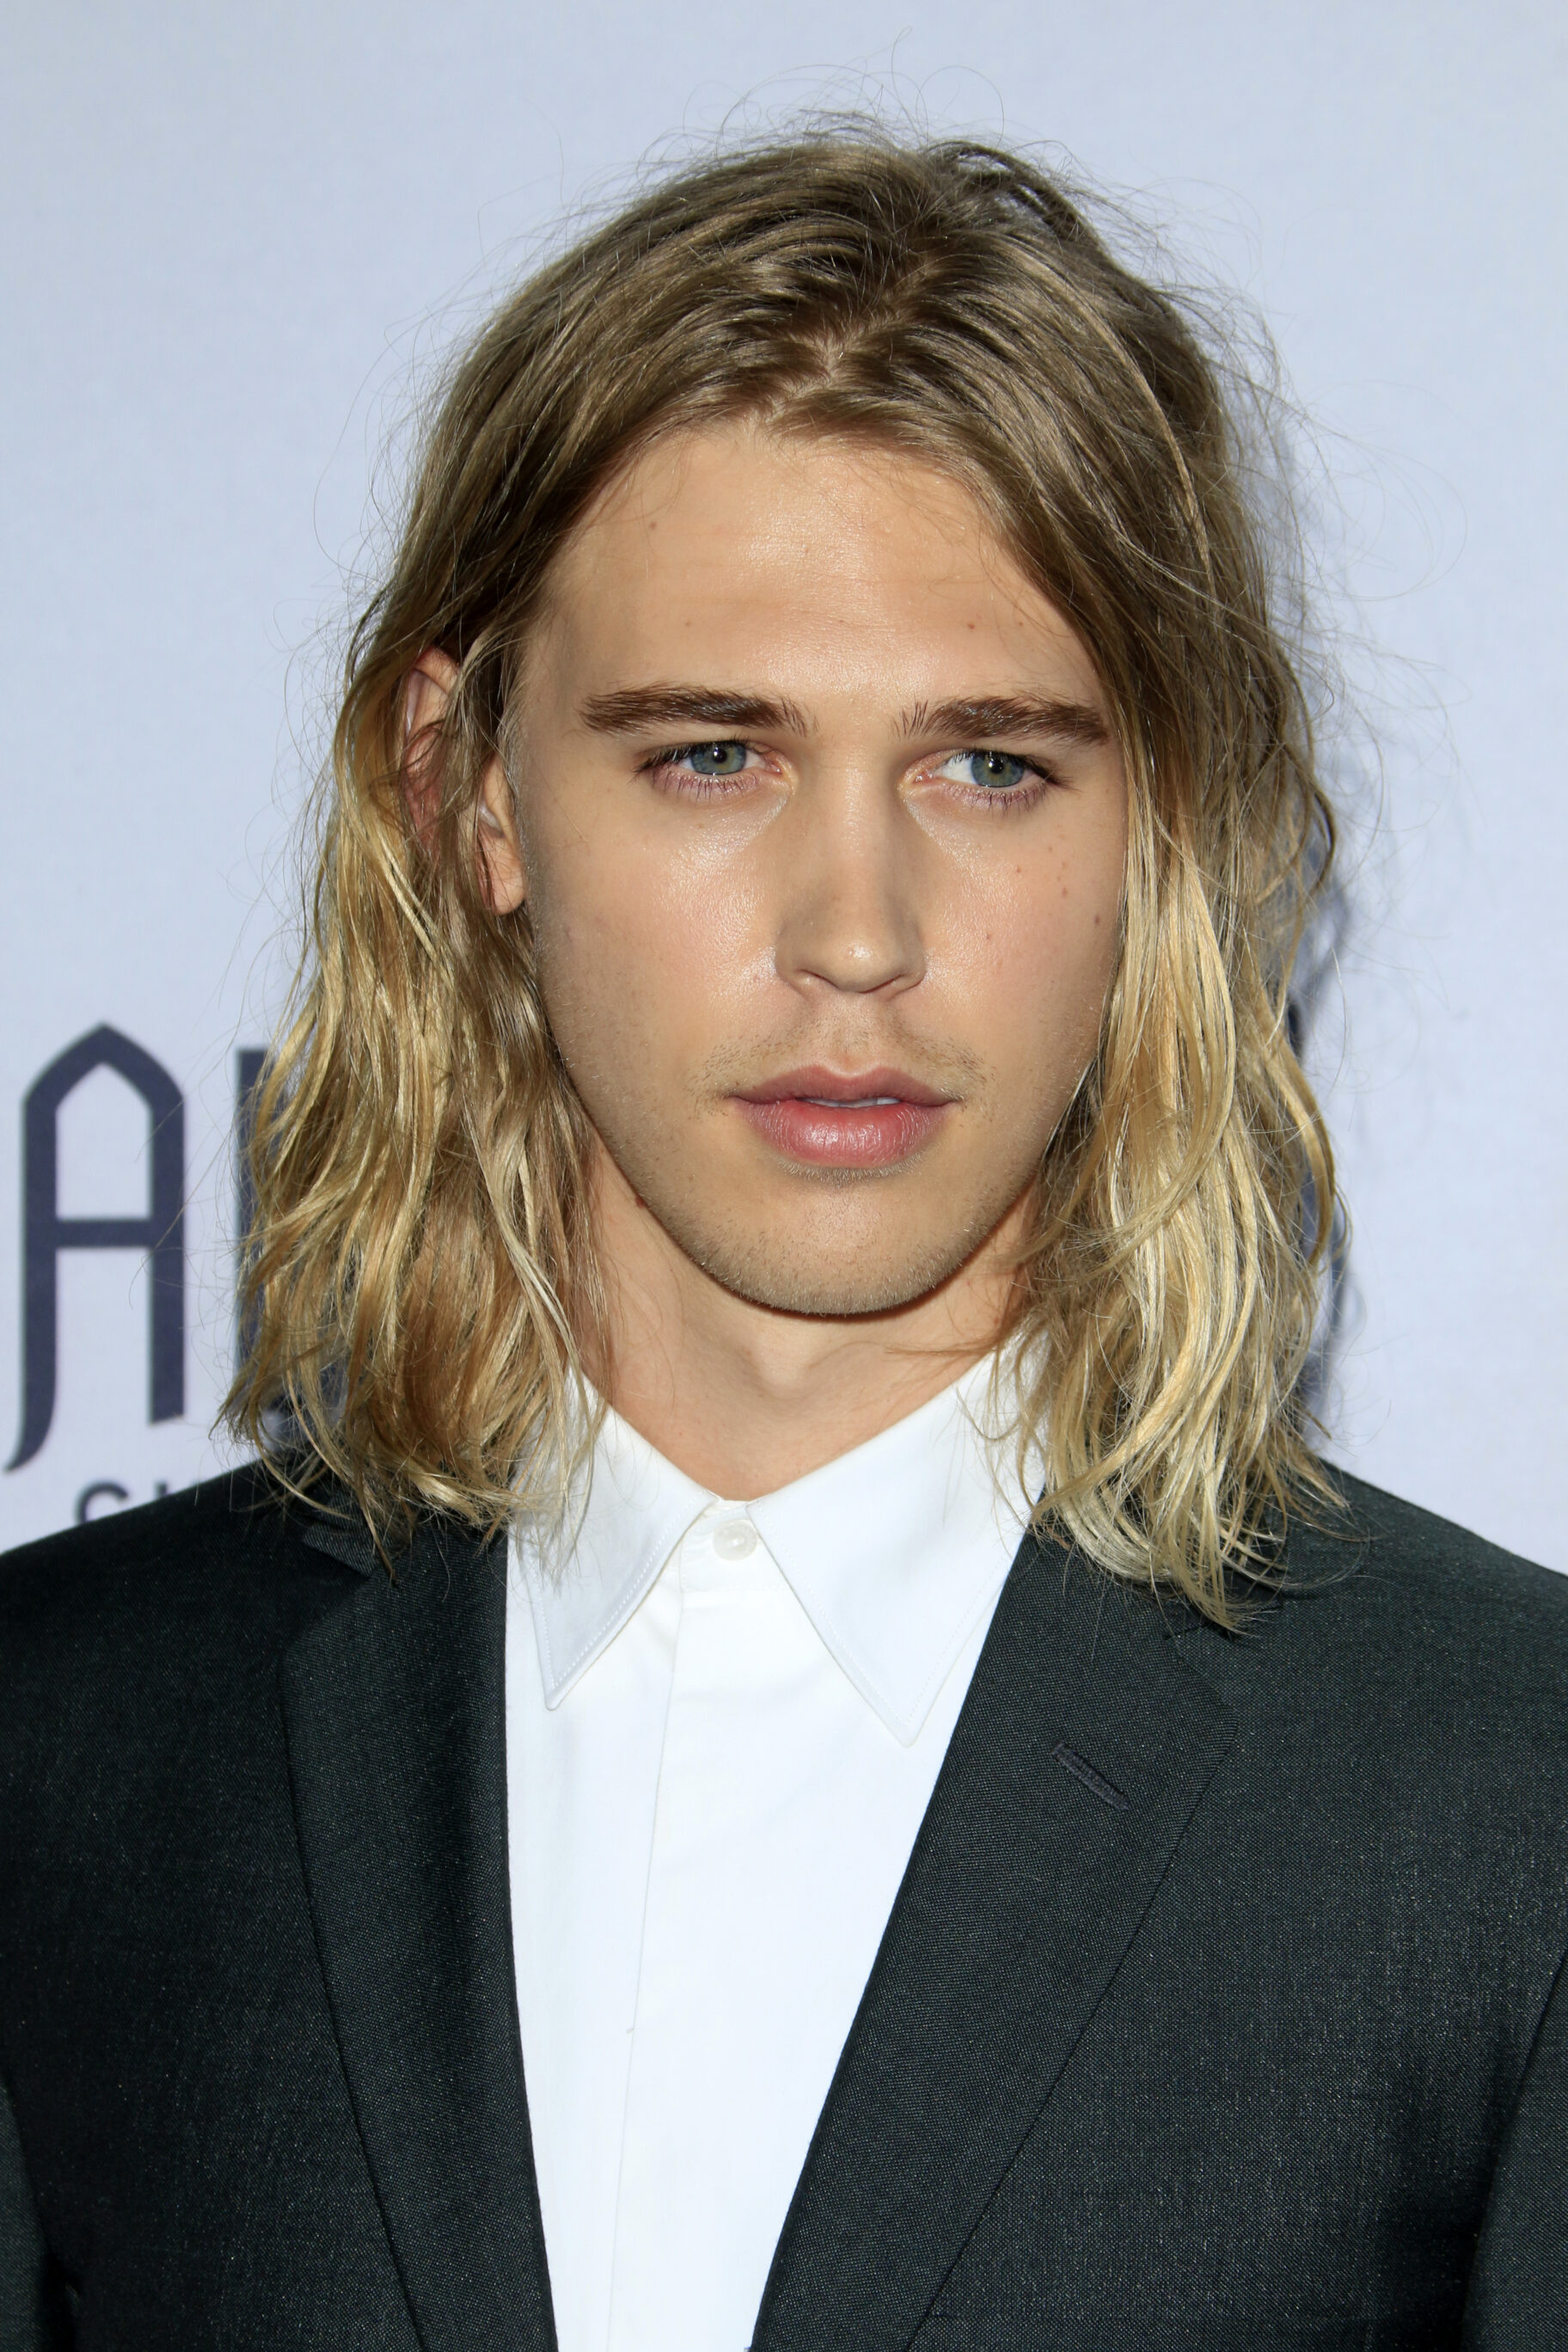 50 Hottest Male Celebrities With Long Hair - Hood MWR